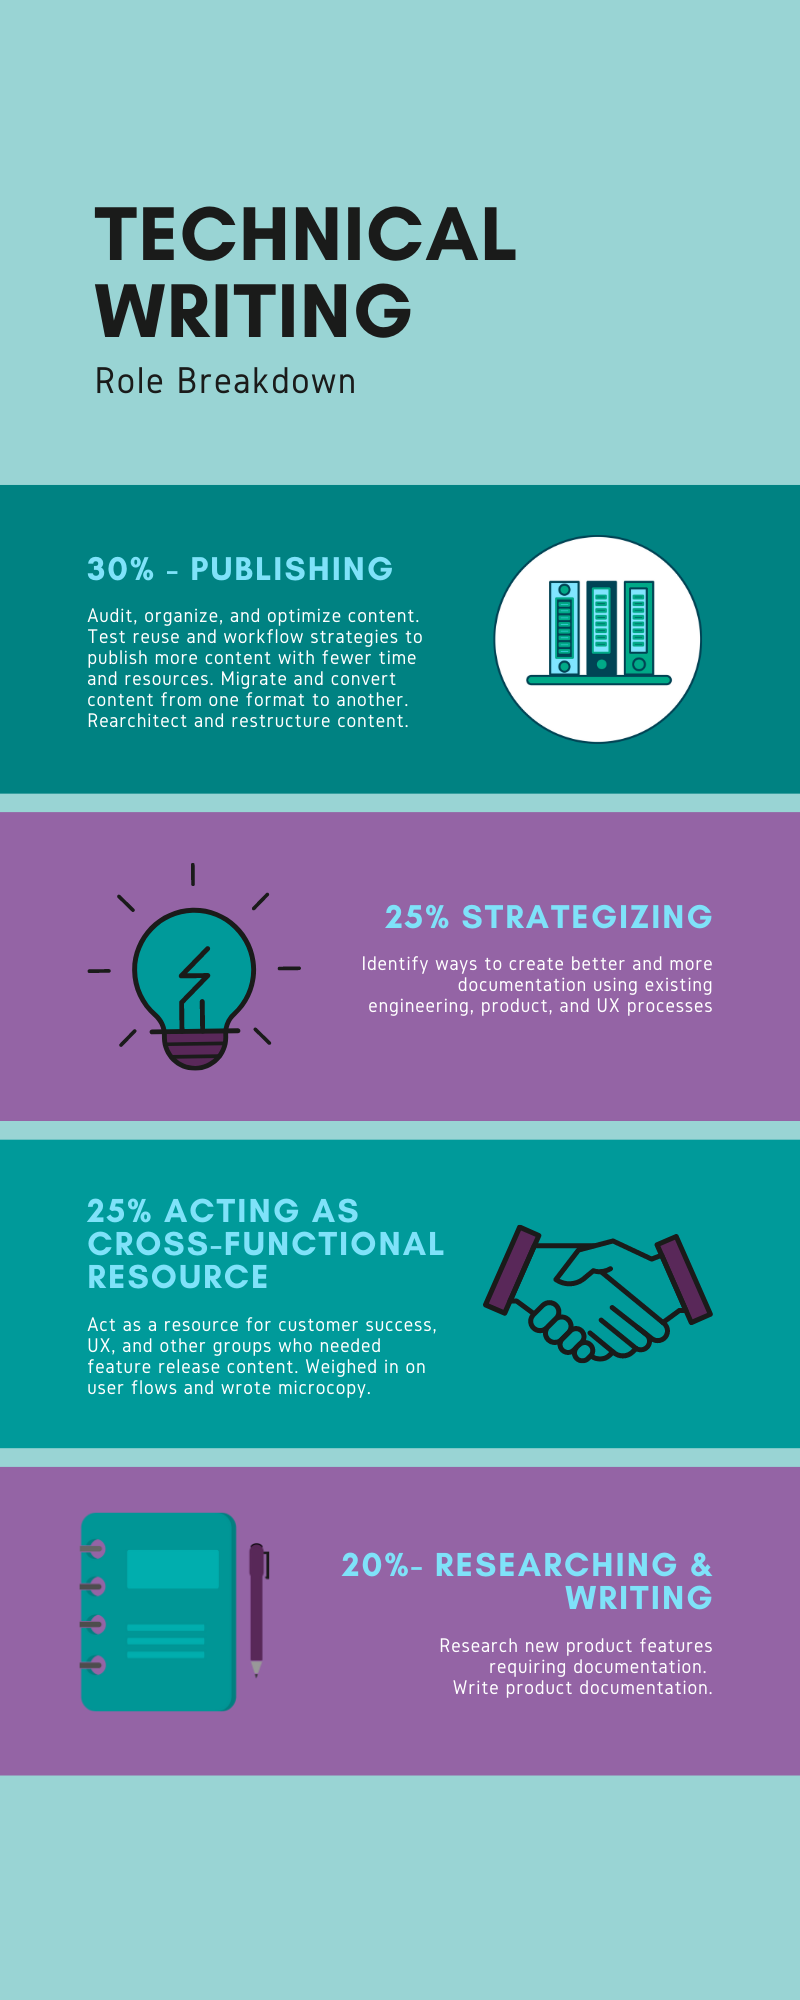 Infographic visually demonstrating the statistics listed after (30% publishing, 25% strategizing, 25% acting as a cross-functional resource, 20% researching and writing new features).